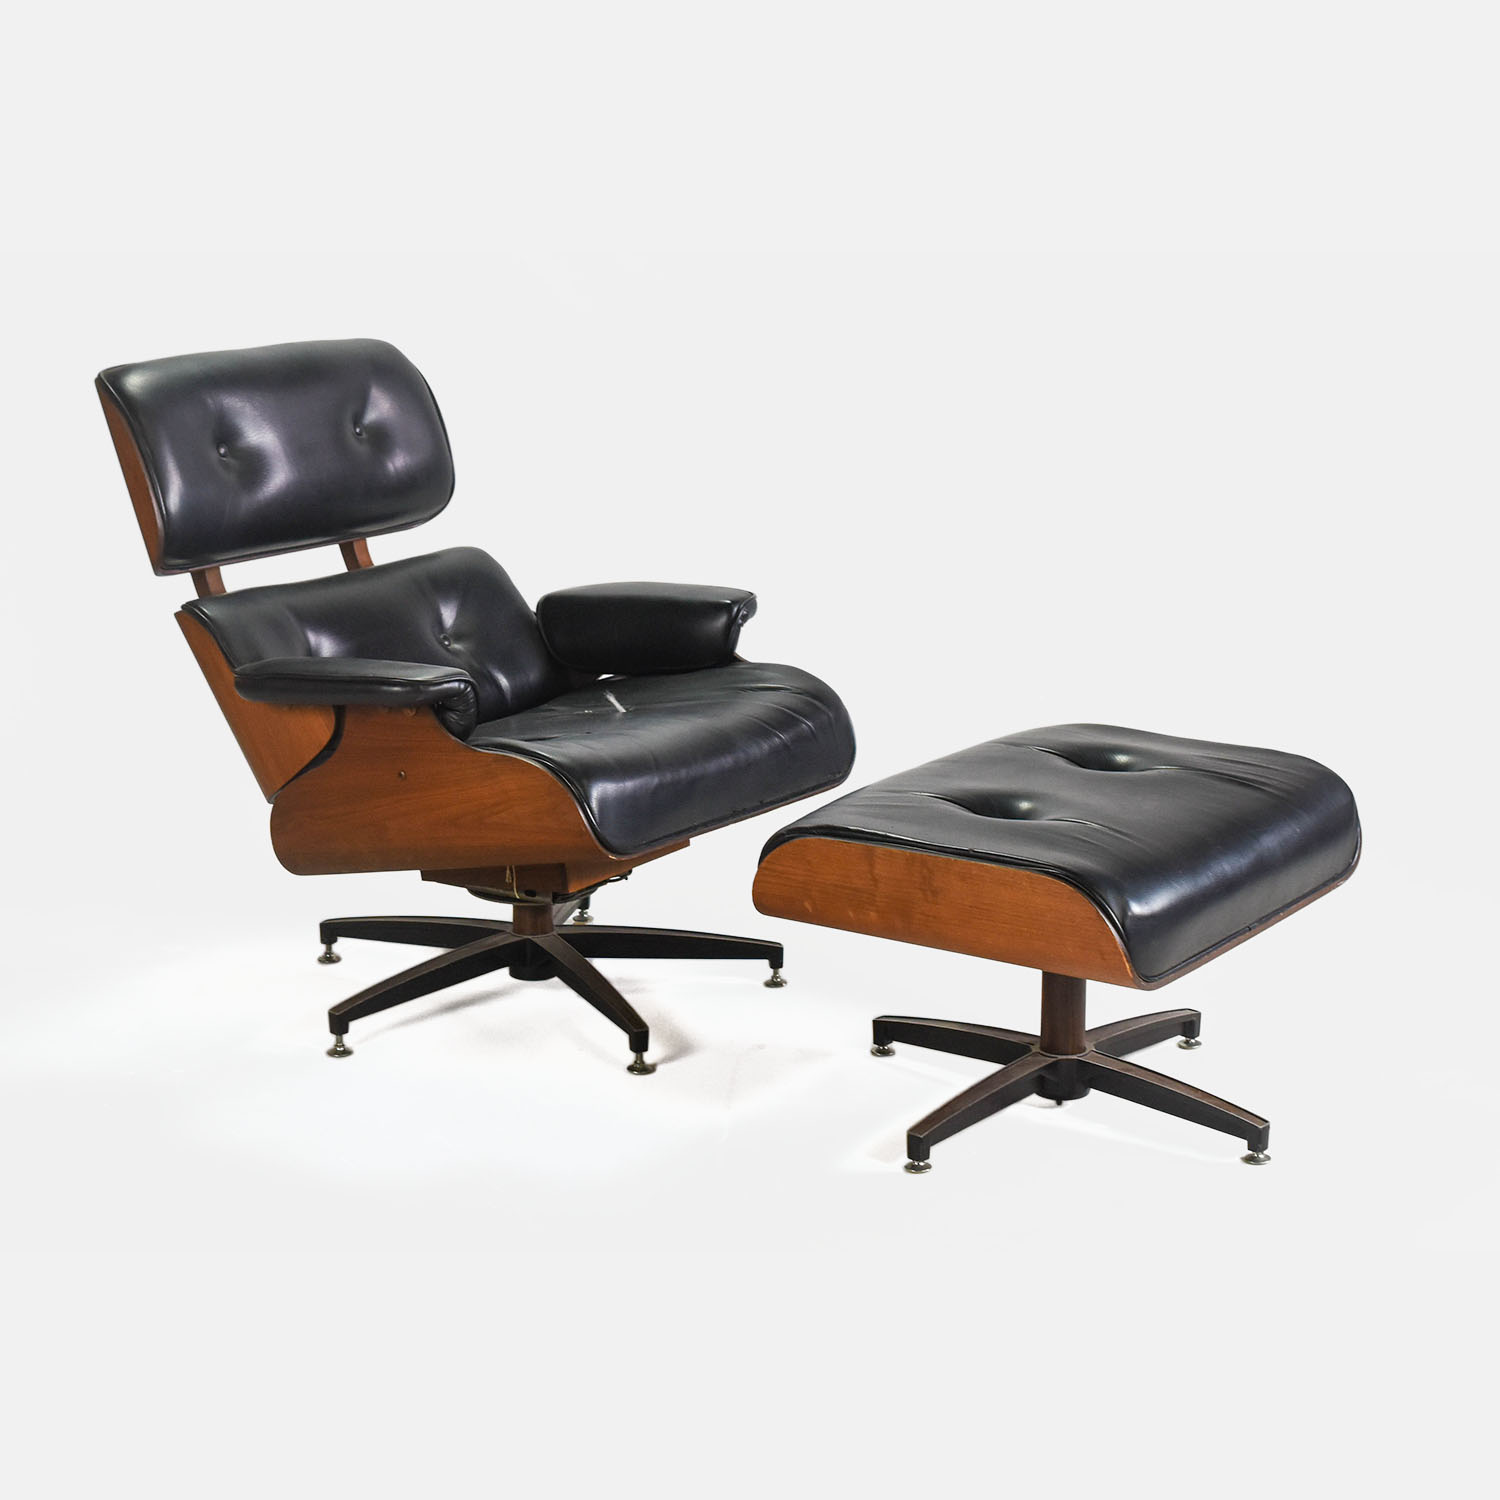 Eames Rosewood Lounge Chair Ottoman Reproduction Copy